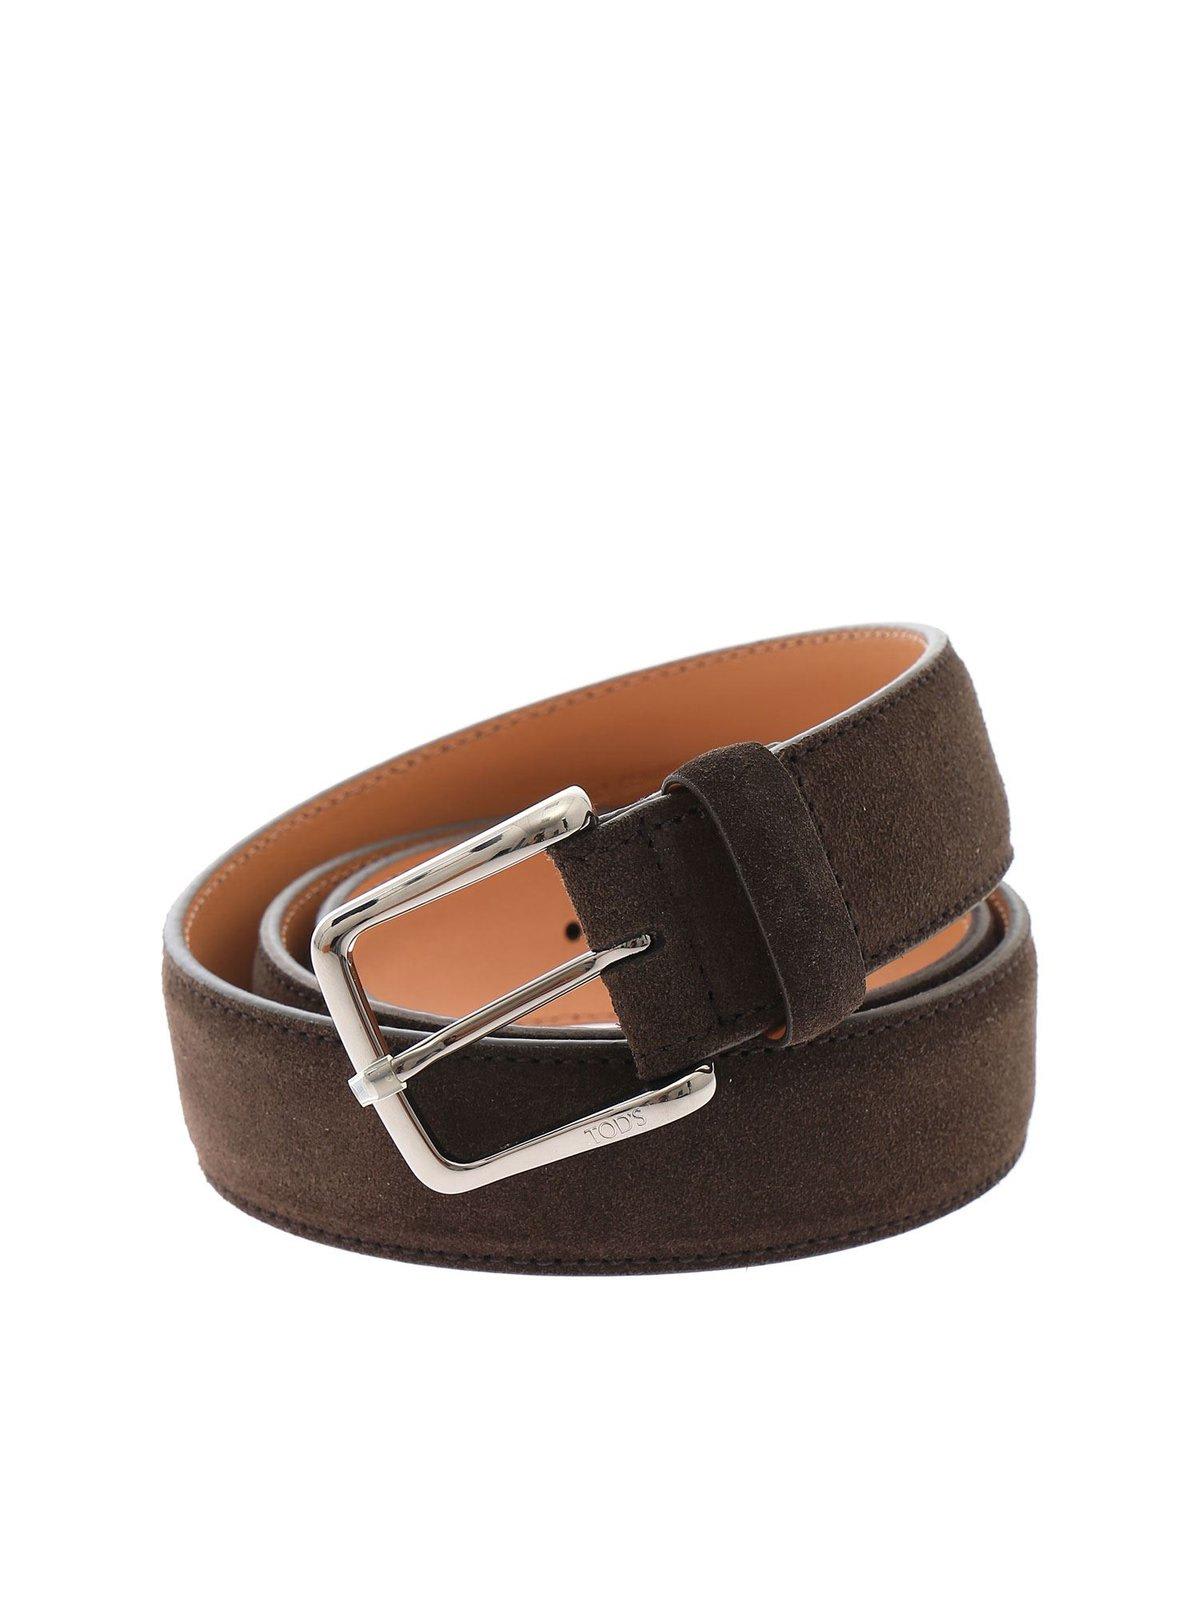 TOD'S SQUARE BUCKLED BELT